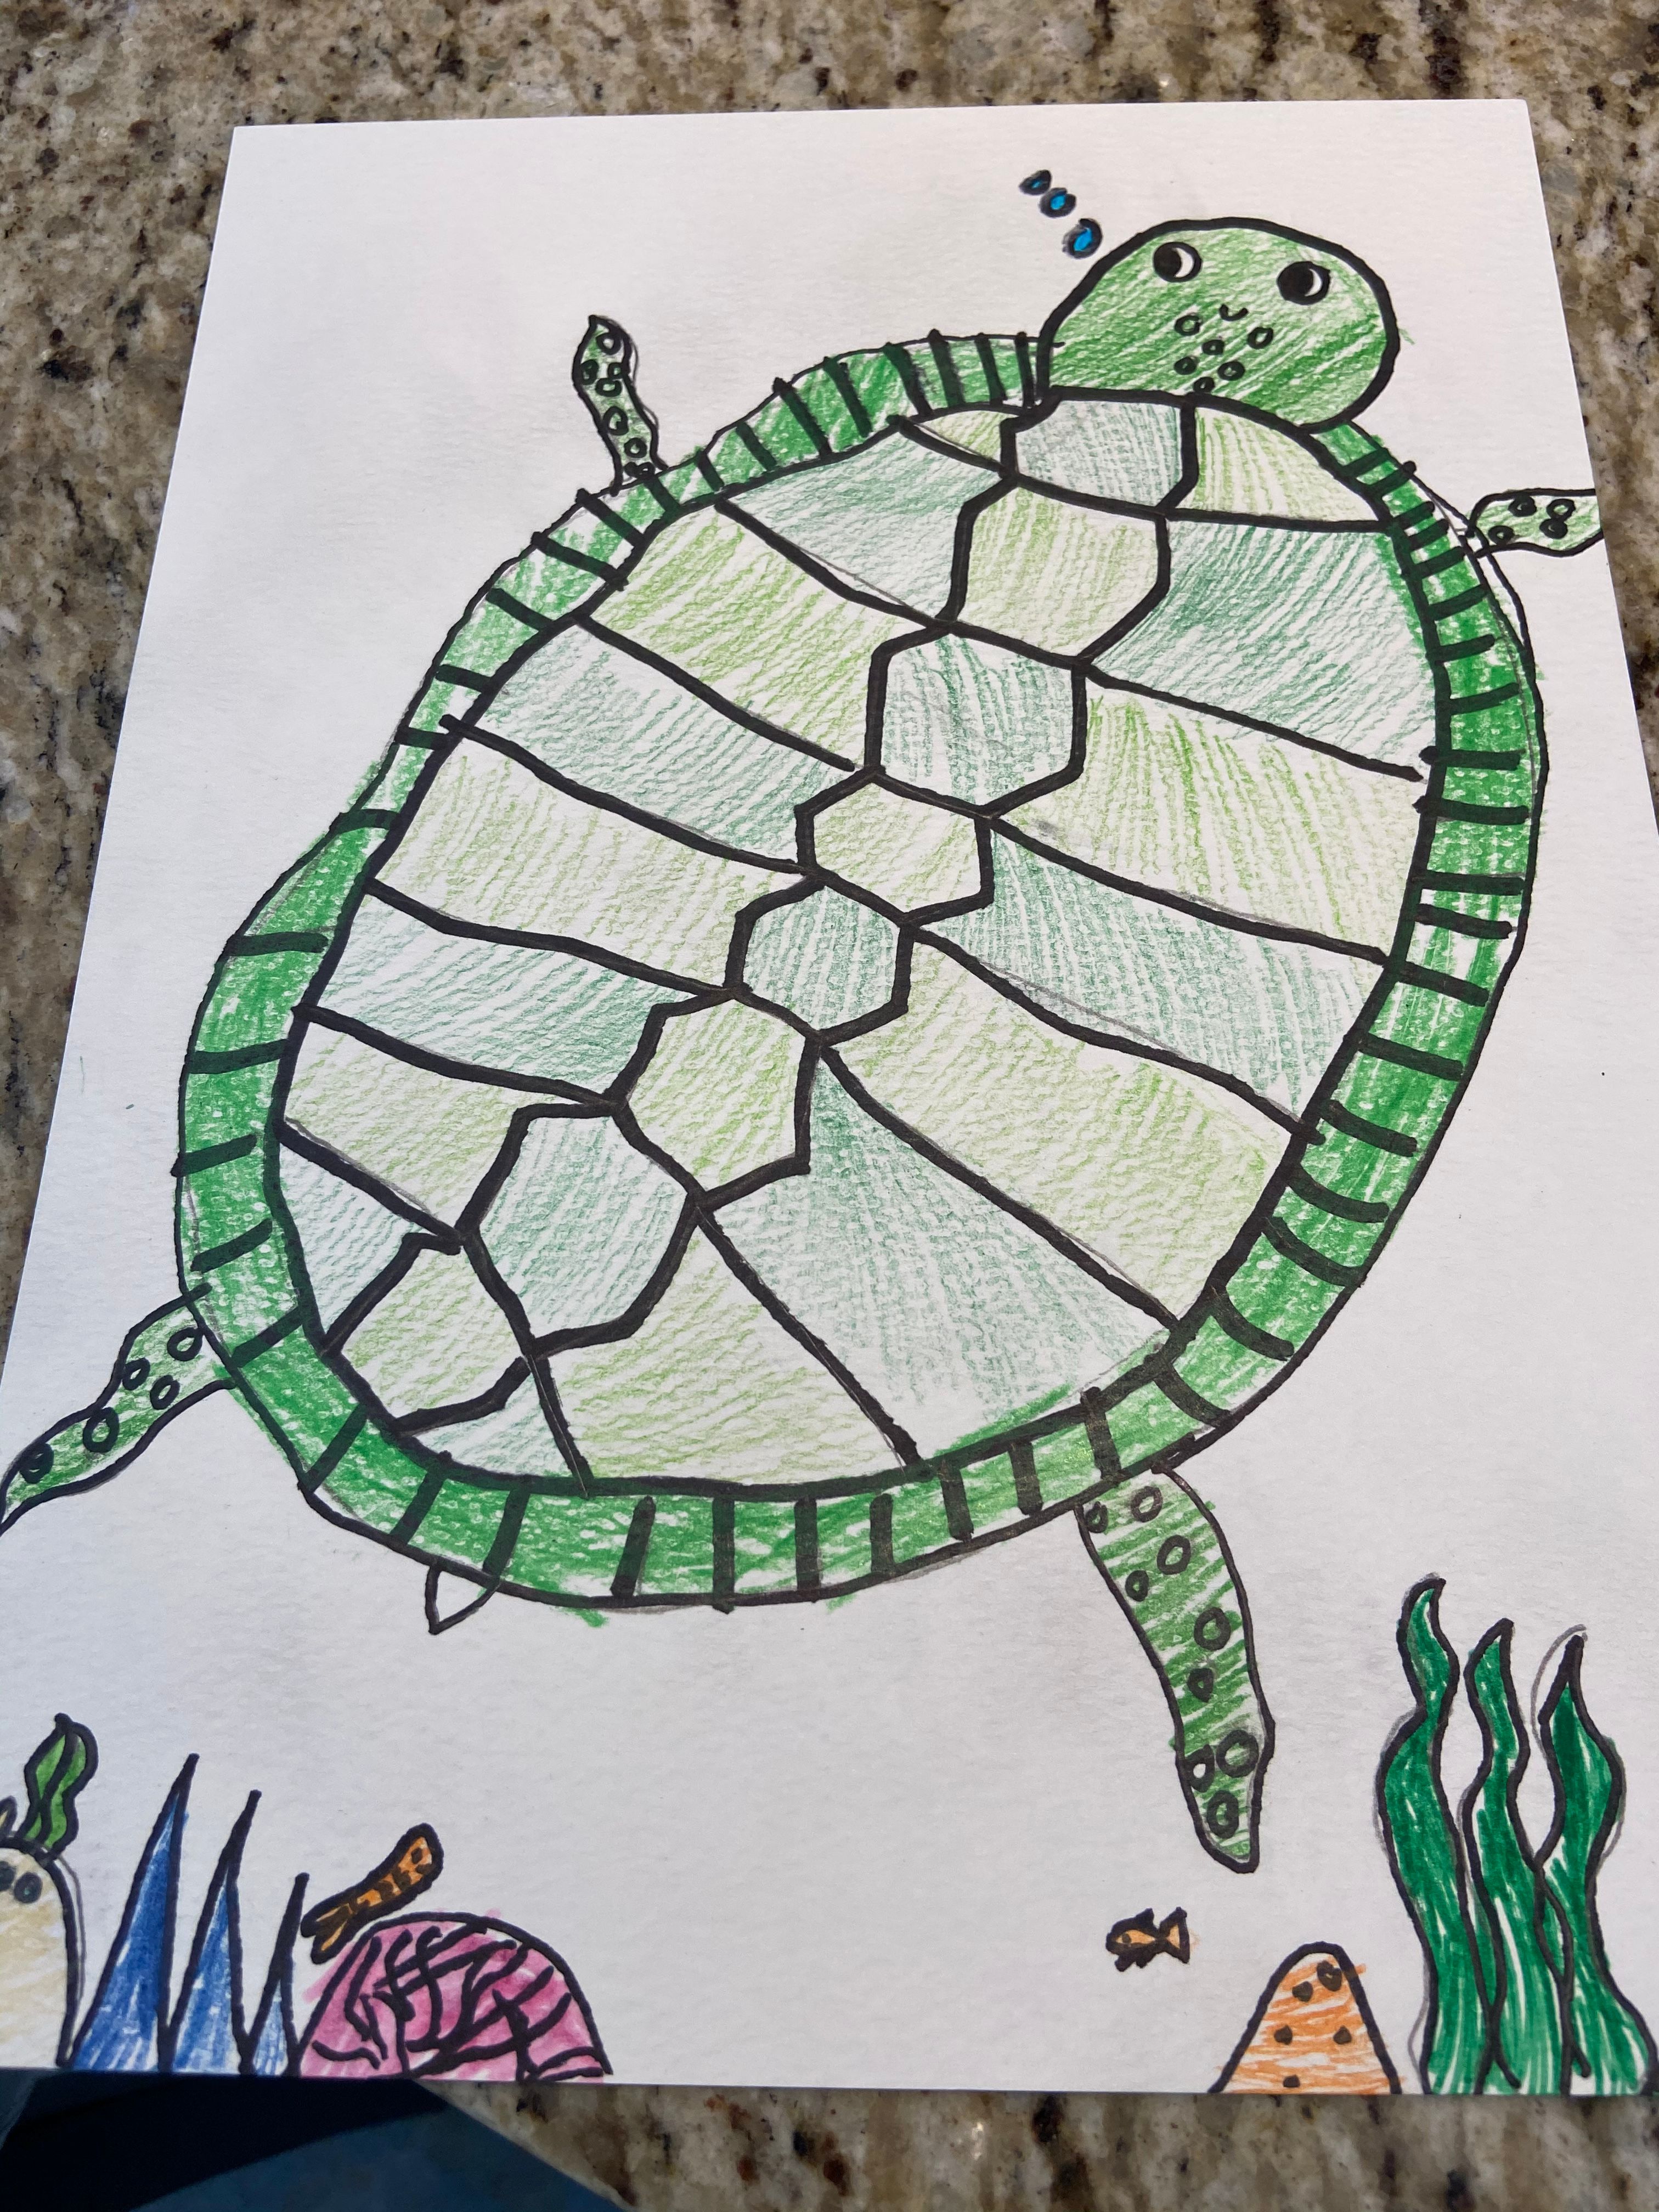 The Sea Turtle: Science and Directed Drawing - June 16th is World Sea ...